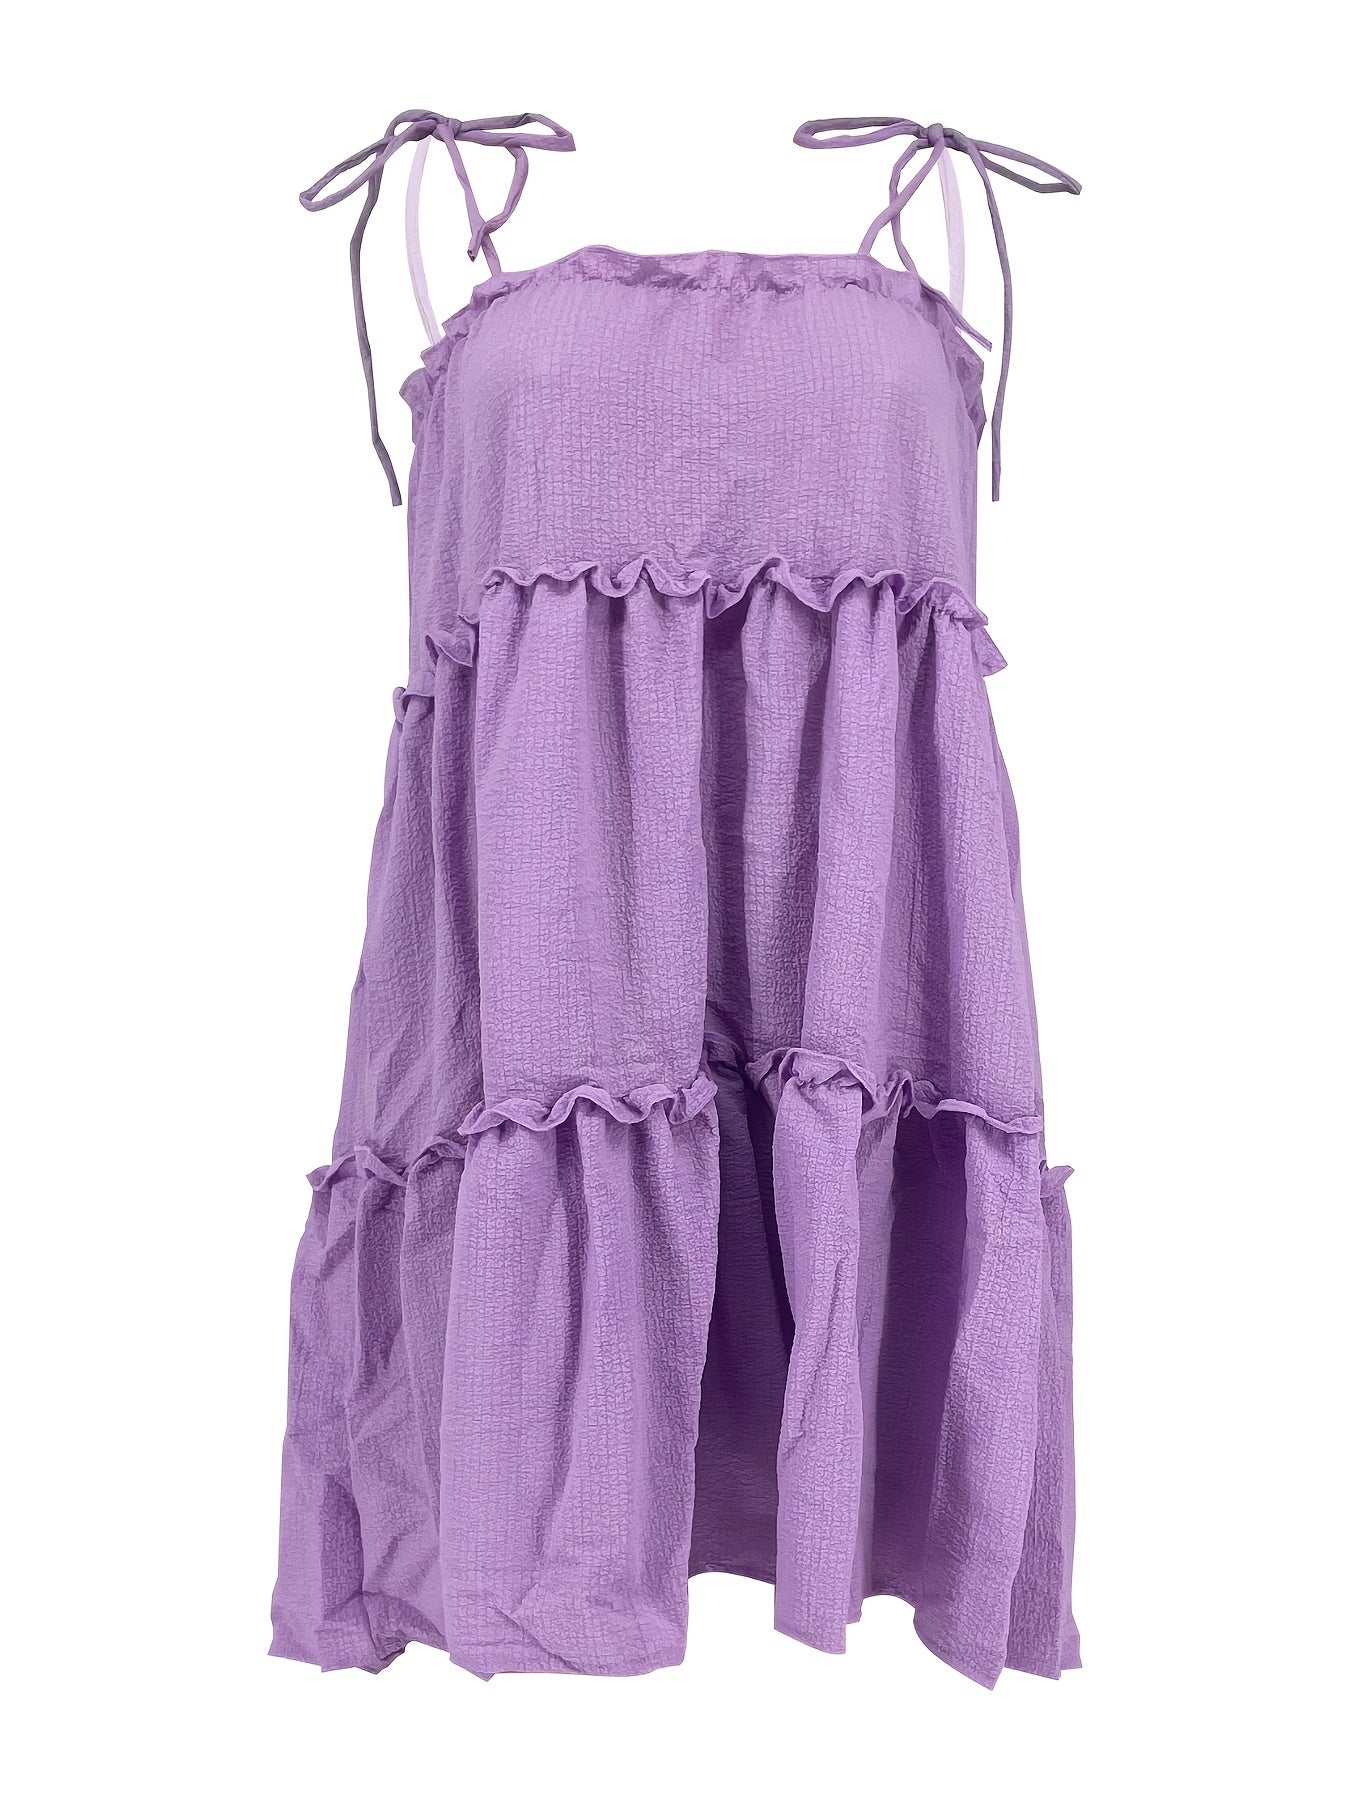 Chic Summer Style: Solid Ruffle Hem Cami Dress With Lace-Up Back, Backless Spaghetti Strap Sundress, Easy-Care & Durable